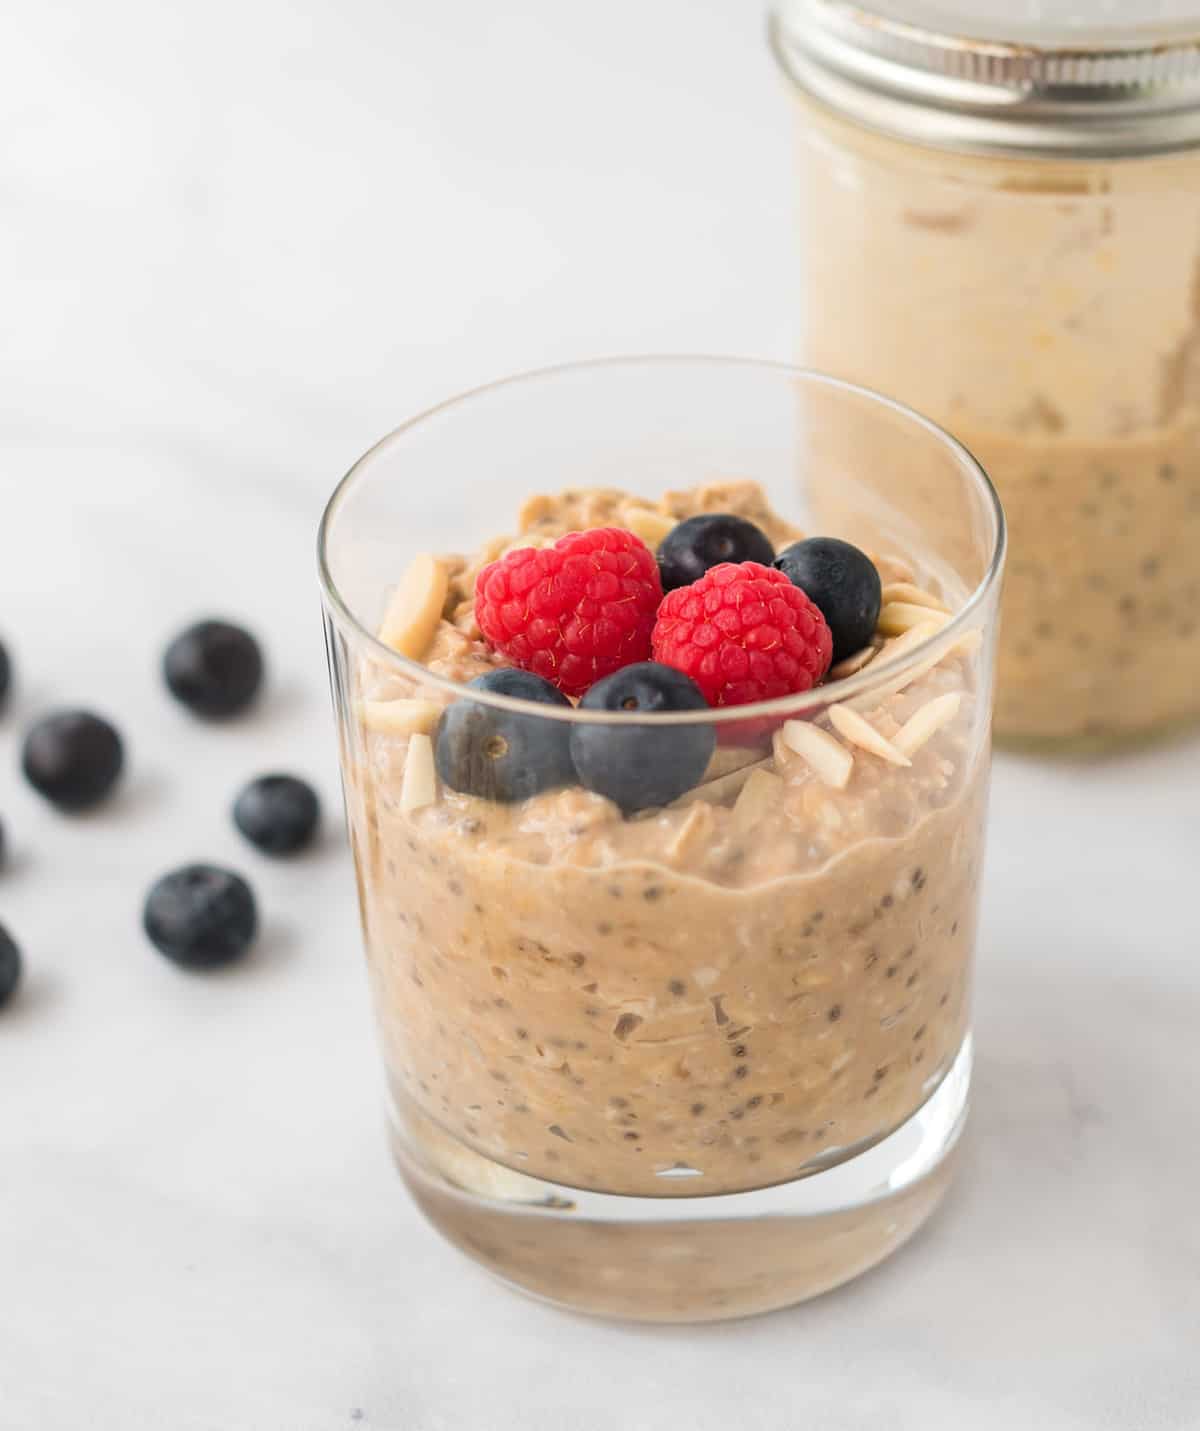 protein overnight oats in a clear glass topped with slivered almonds, raspberries, and blueberries